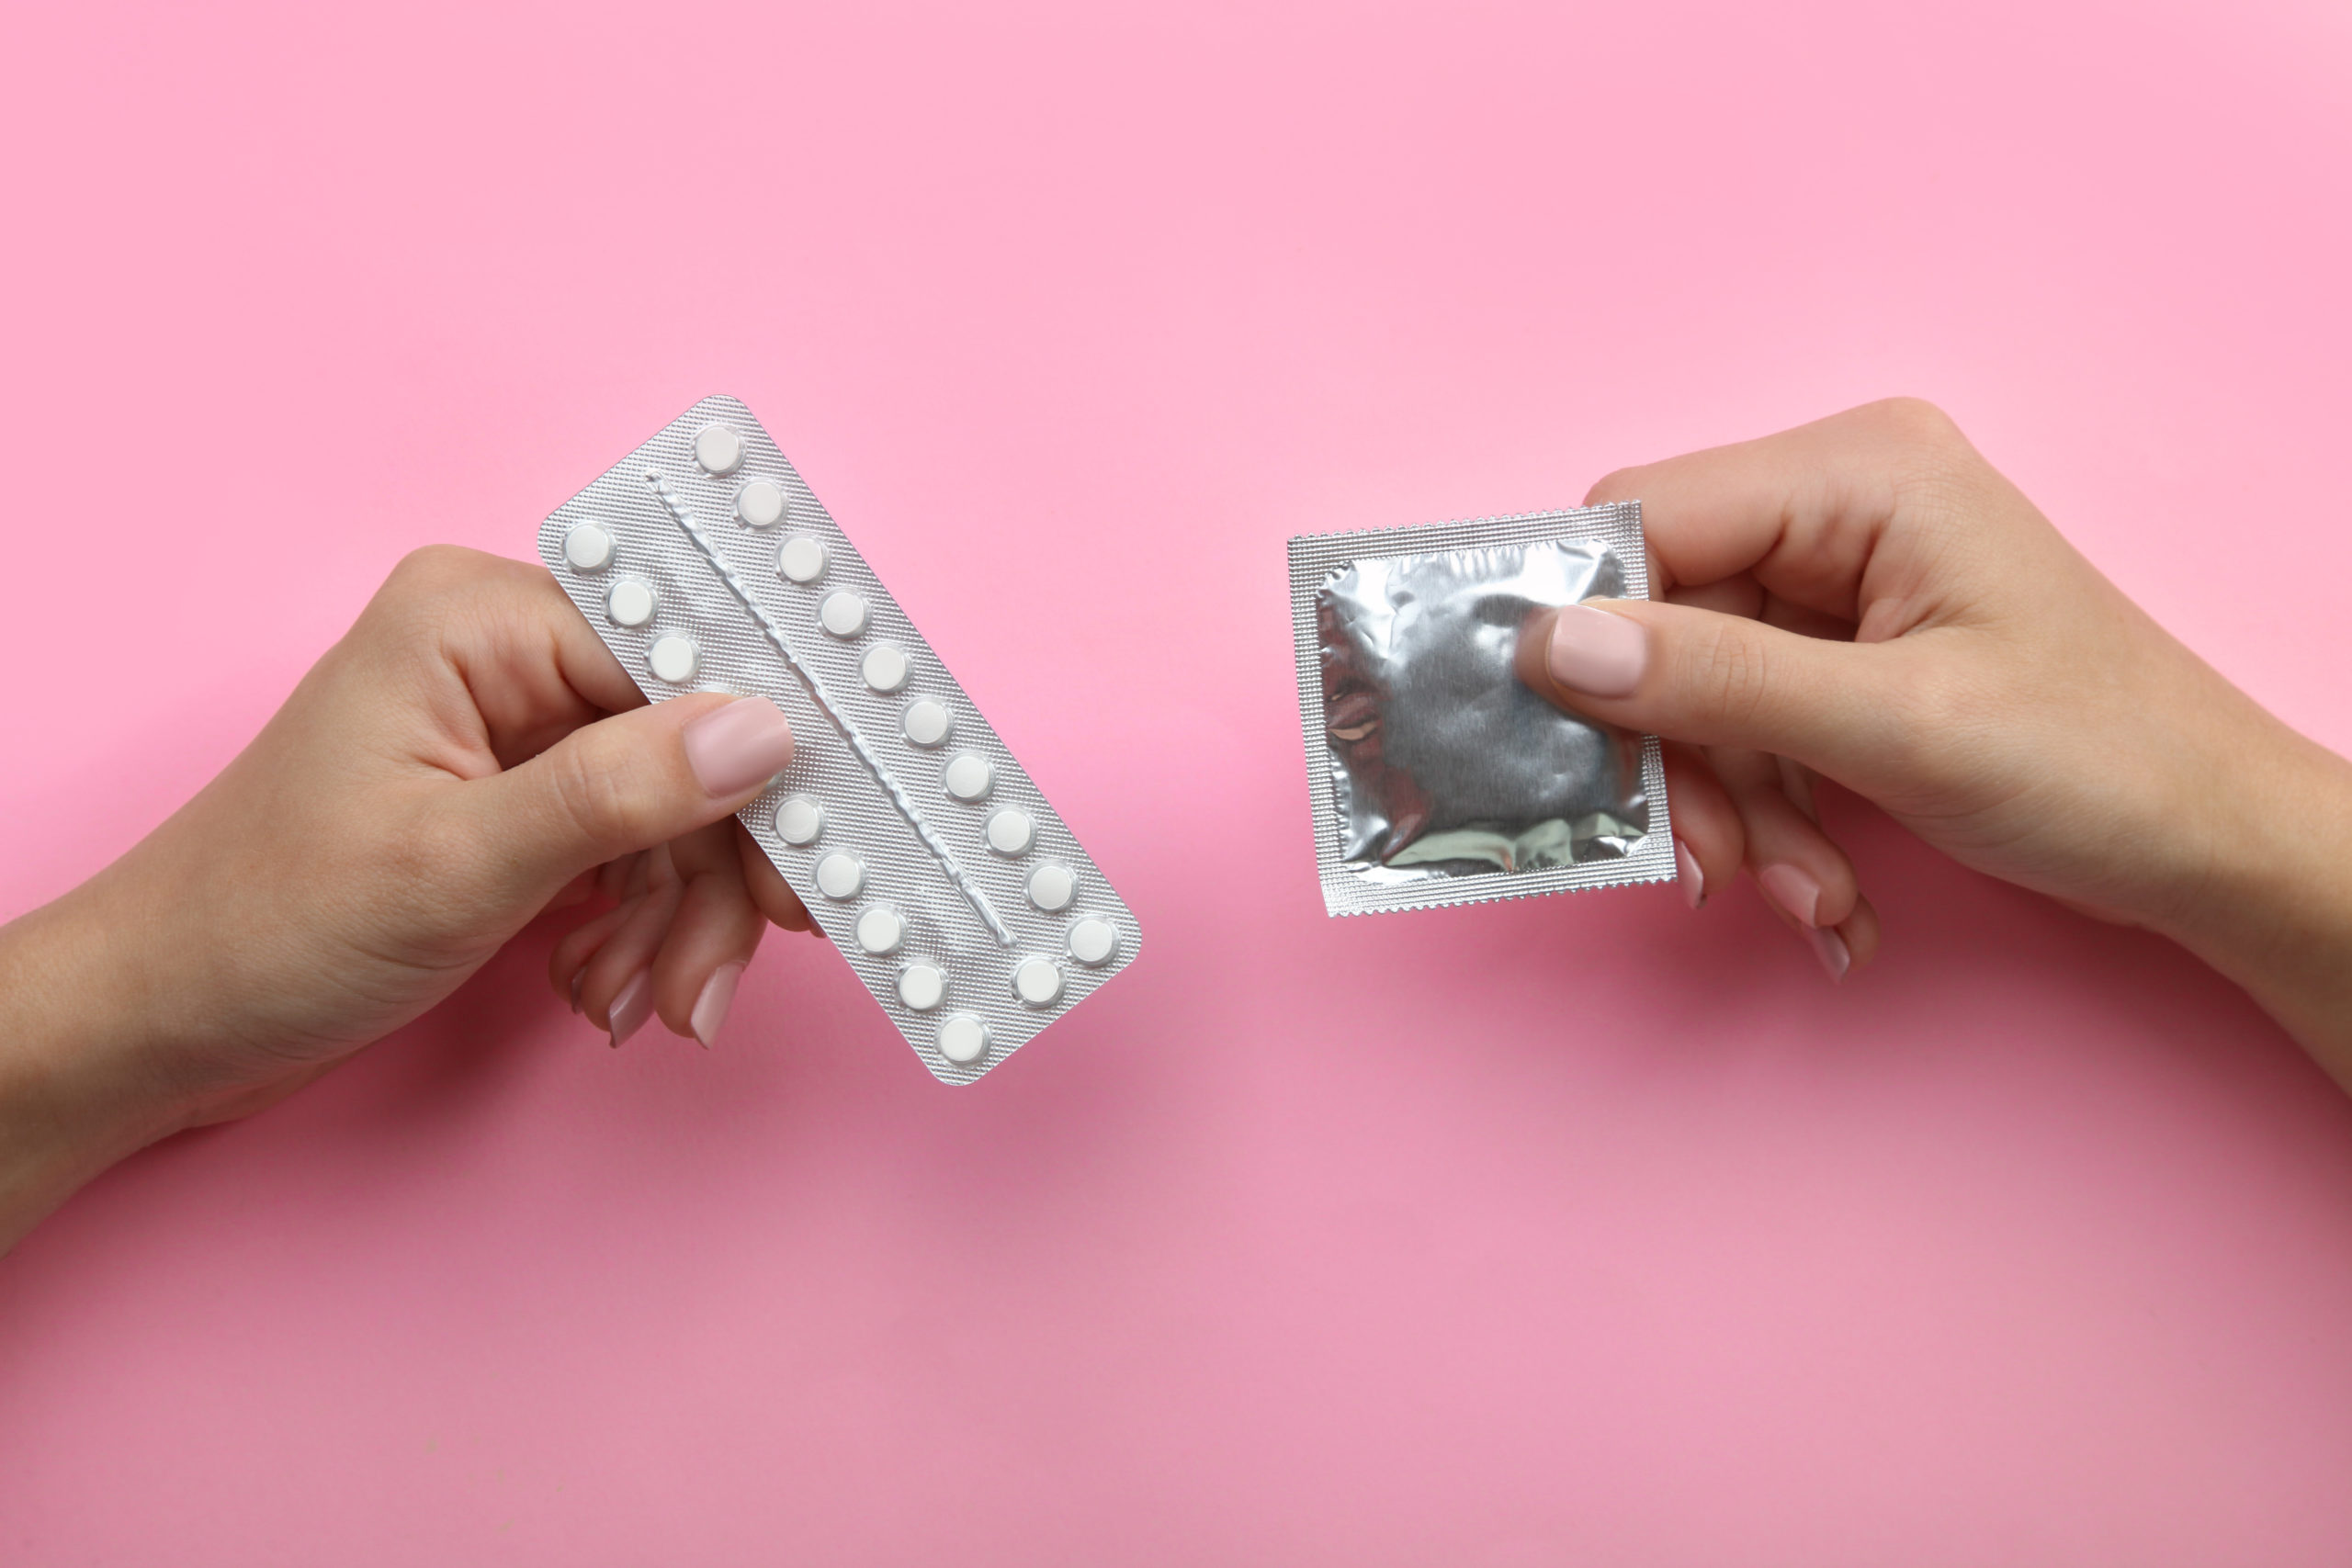 What you need to know about conceiving after birth control